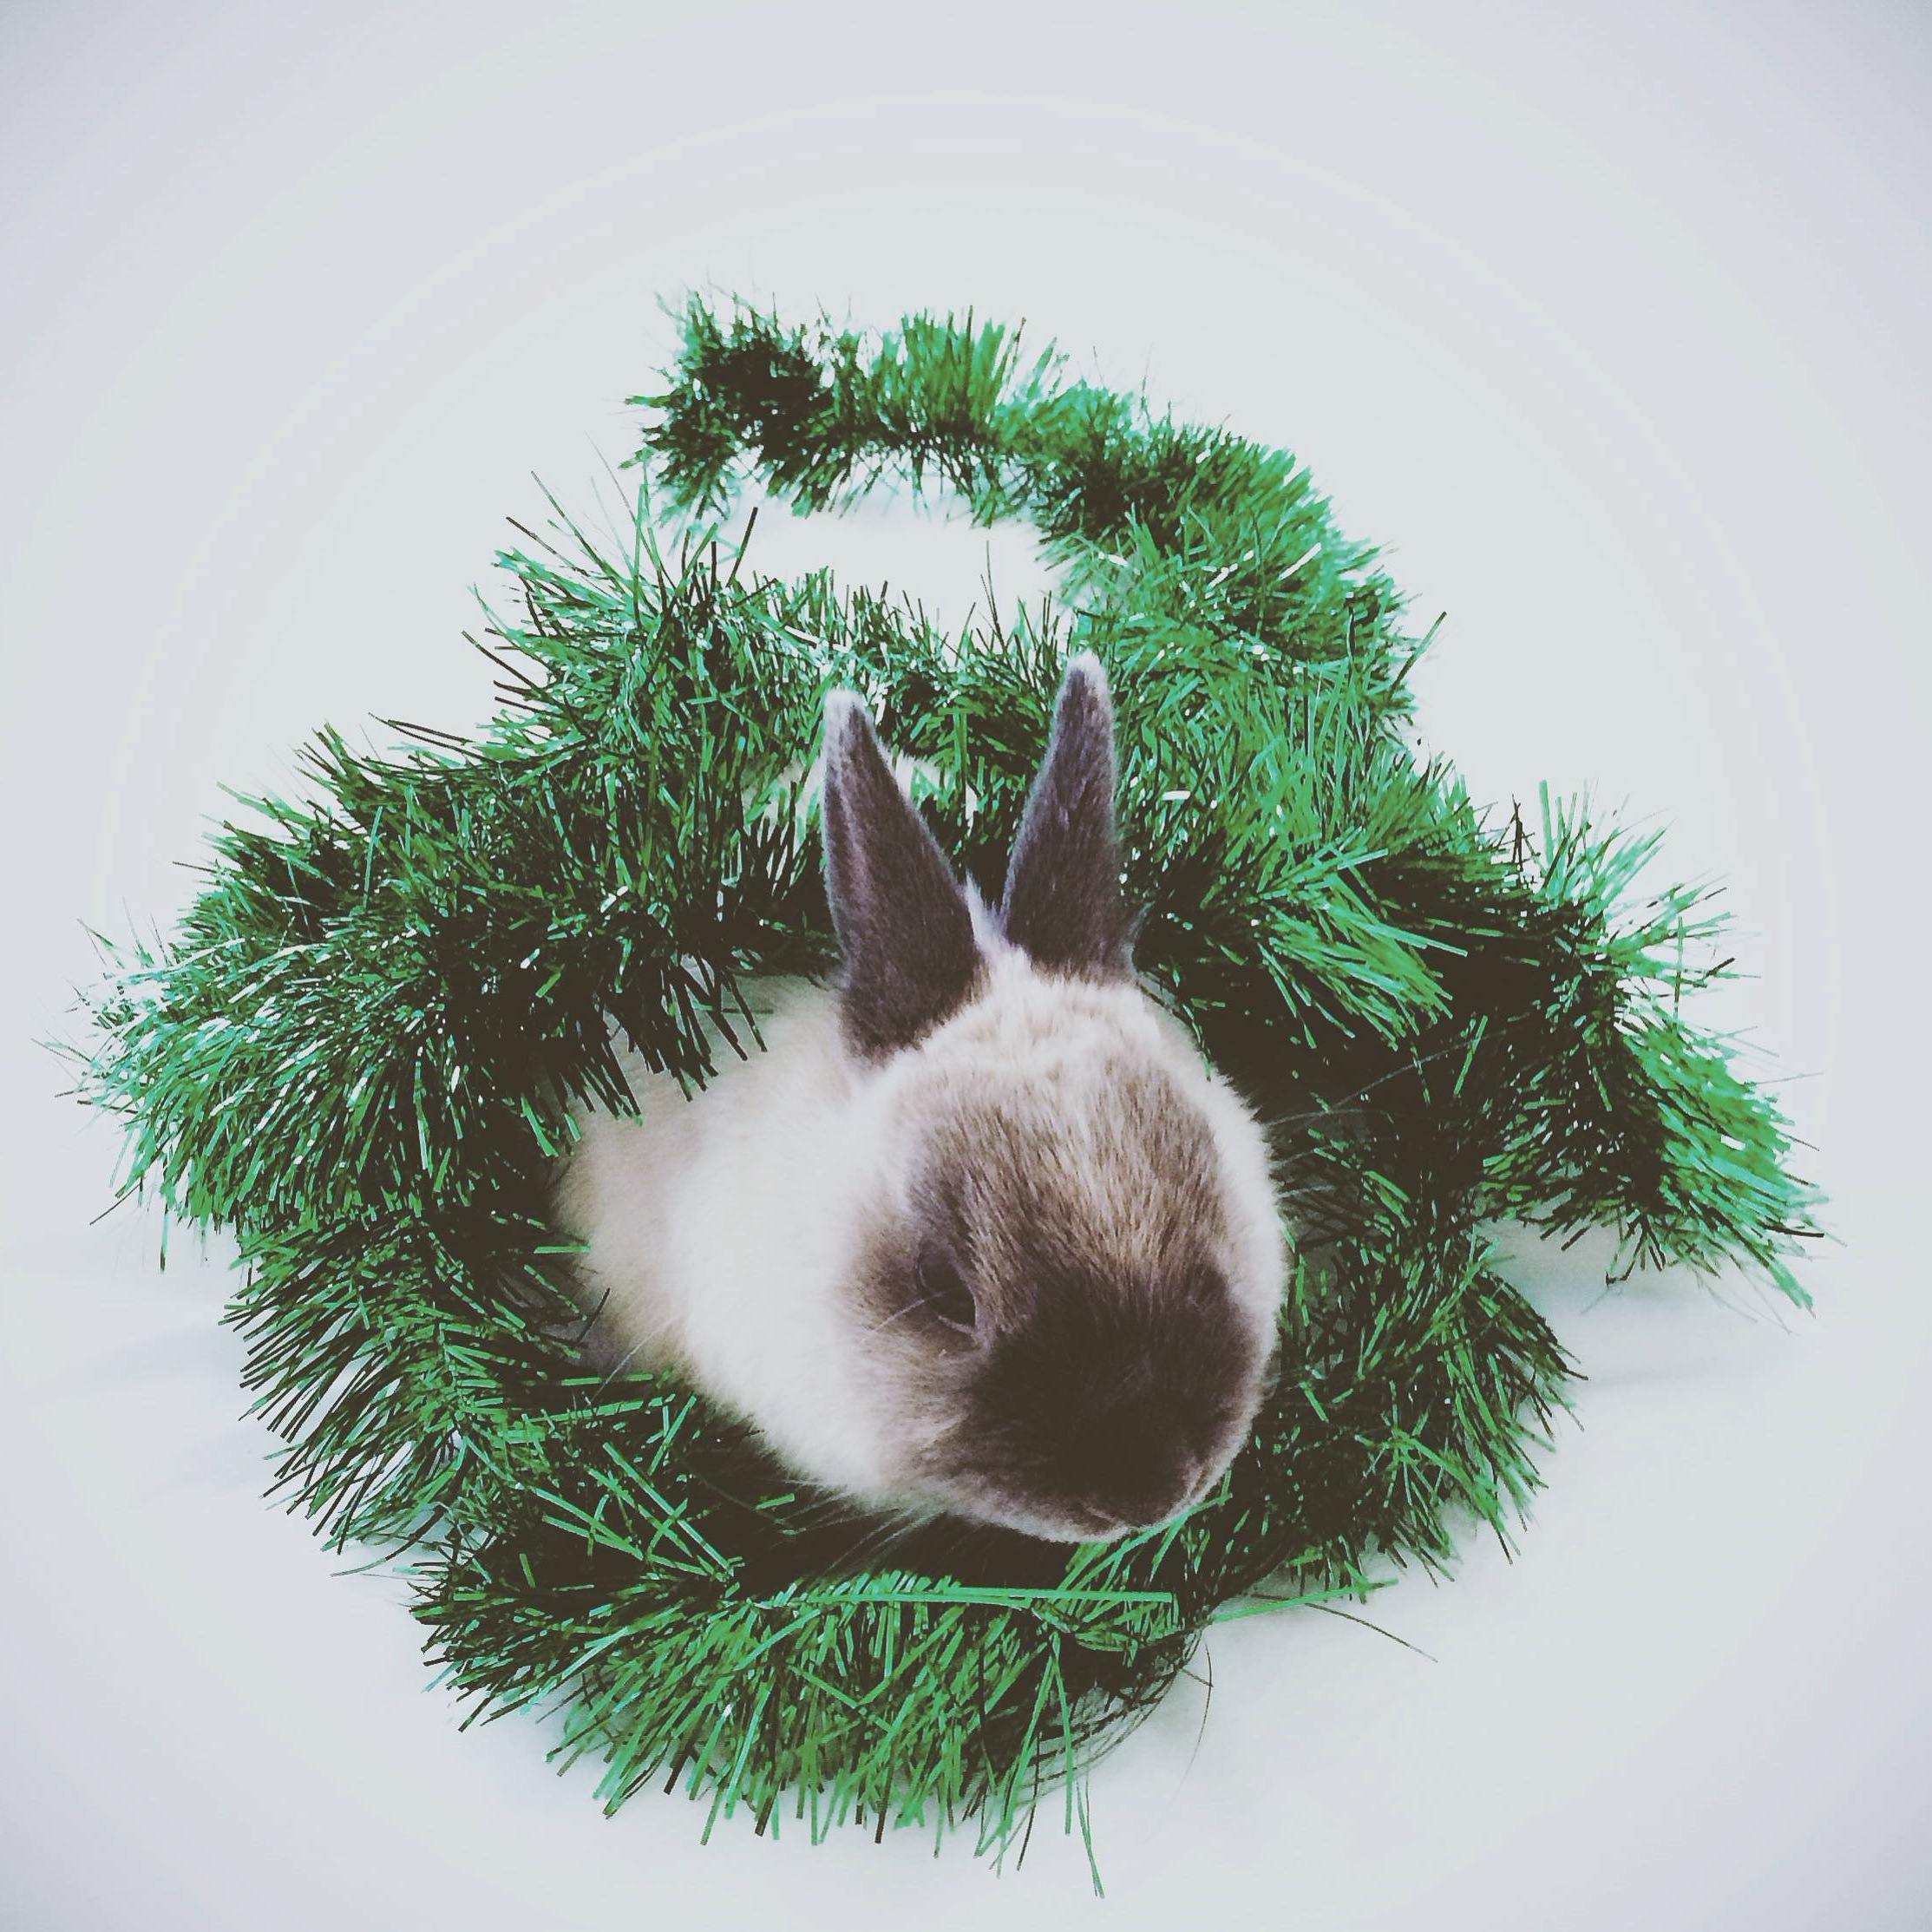 Bunny Is at the Center of a Tinsel Wreath